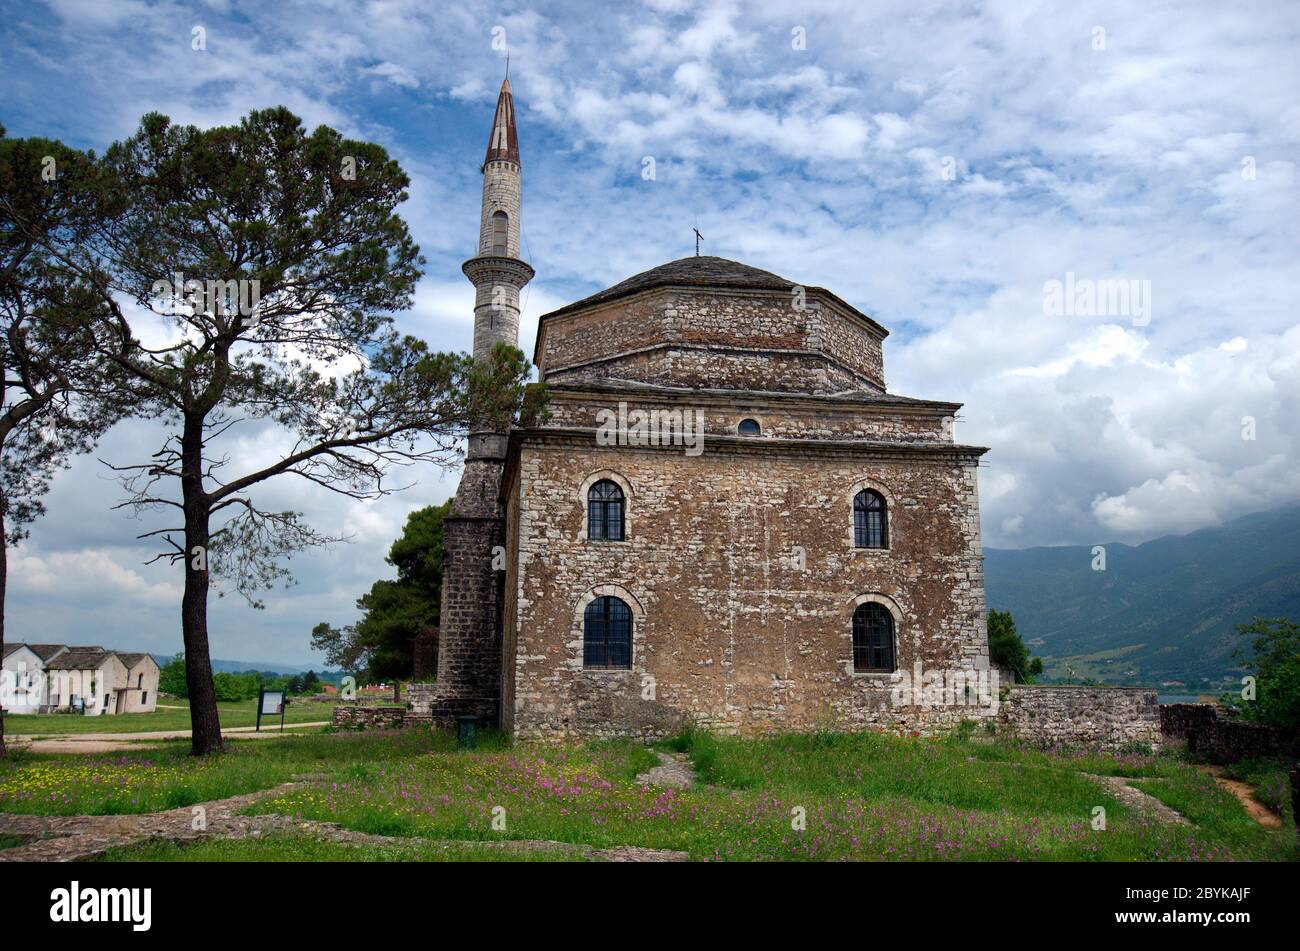 Greece, Ioannina, medieval Fetiche Mosque with Minaret in old fortress Stock Photo